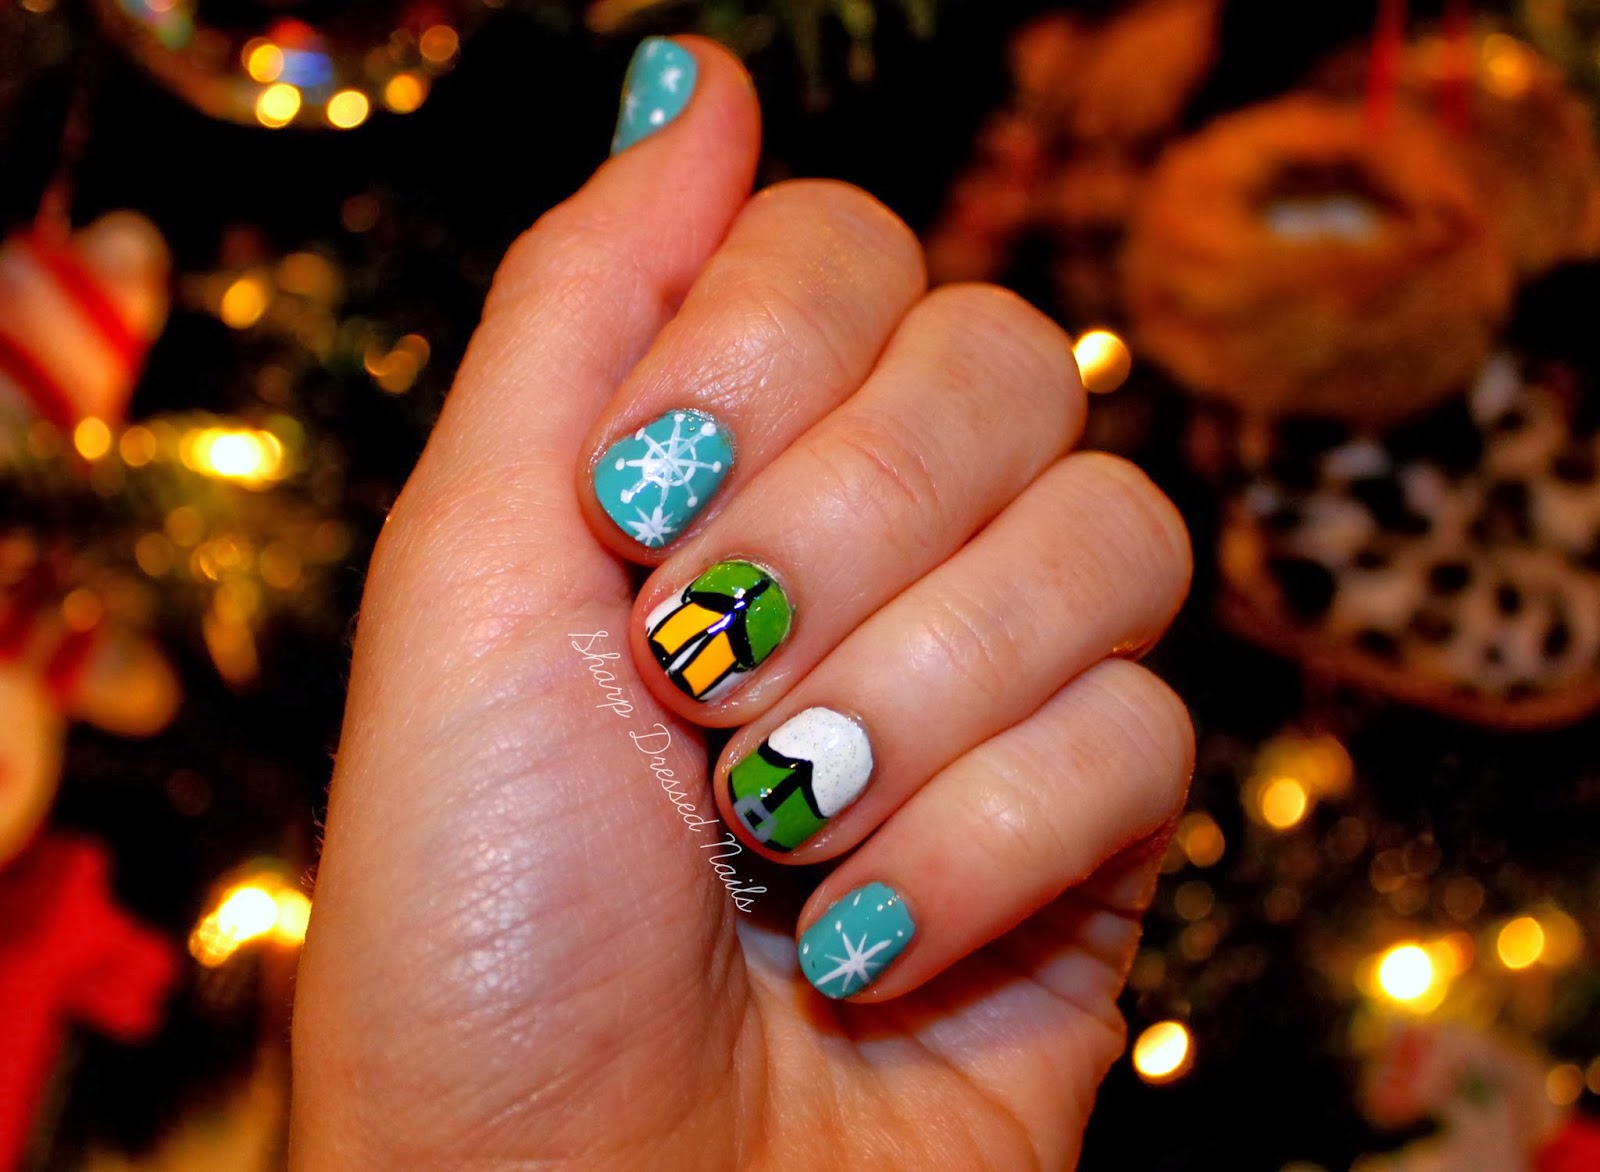 5. "Buddy the Elf" Christmas Sweater Nails - wide 4